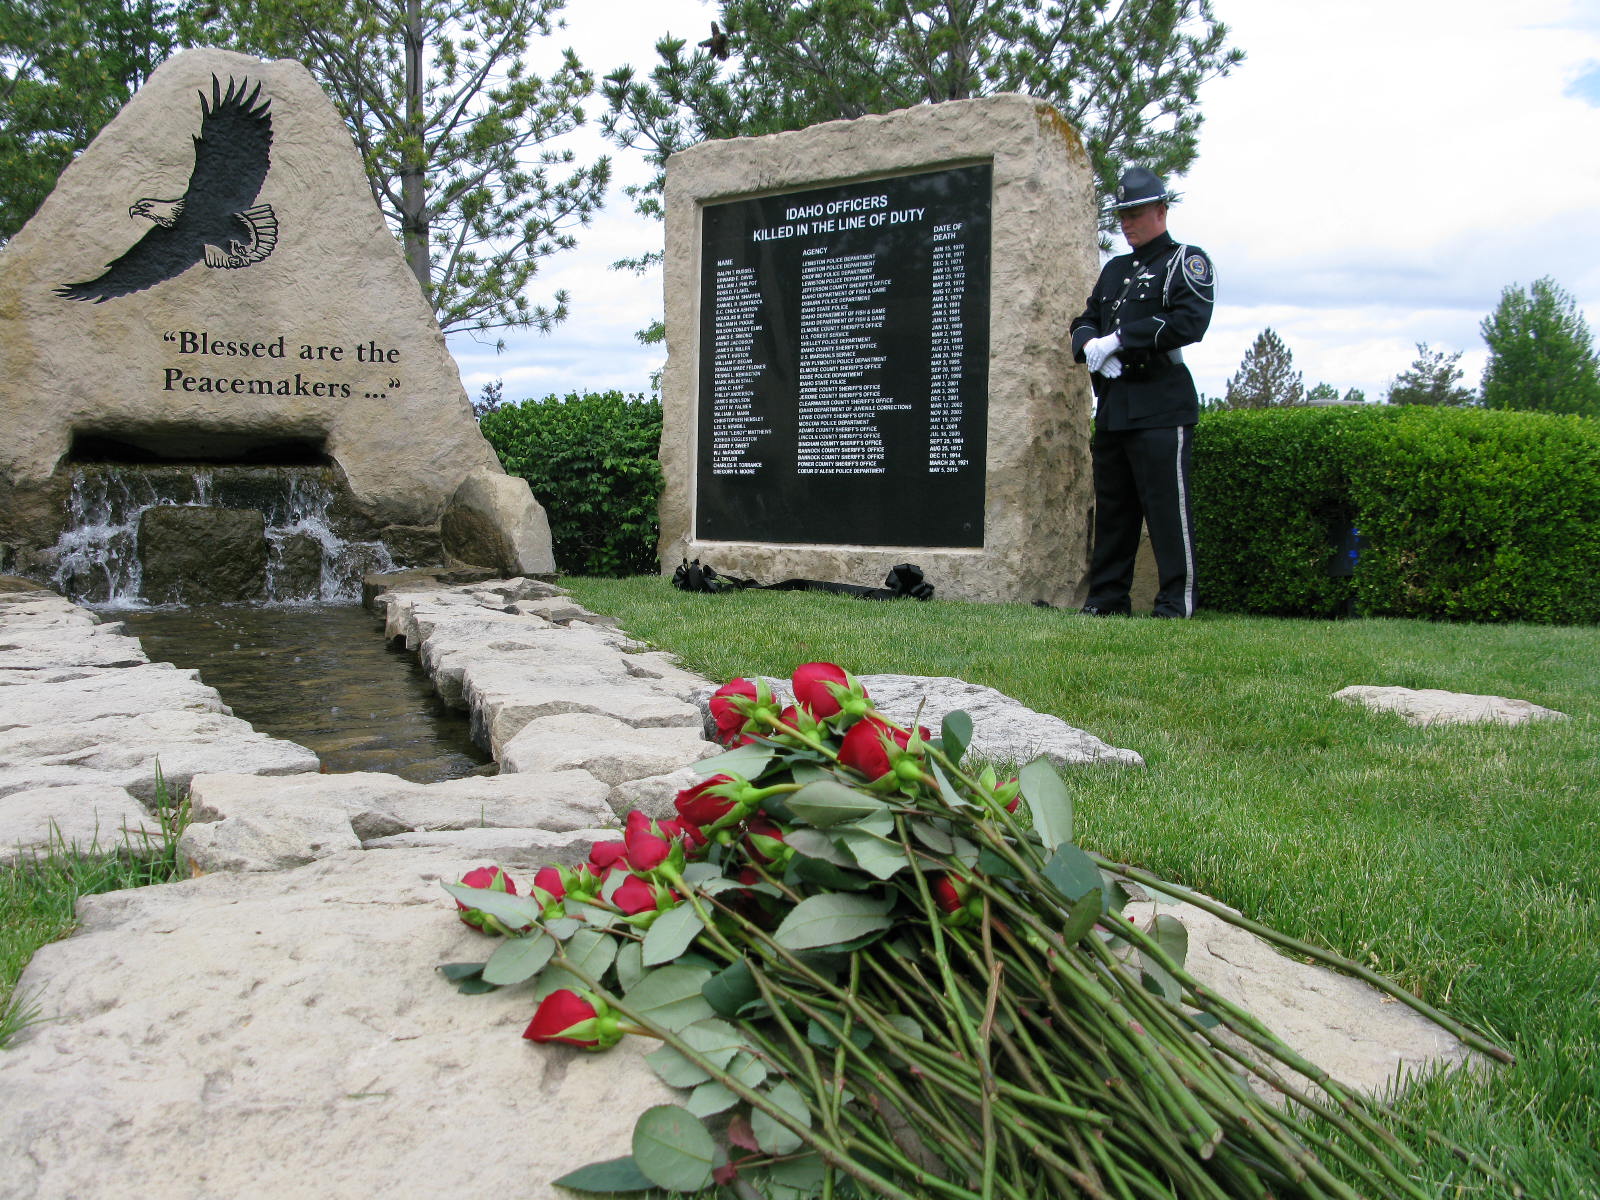 Sgt Greg Moores Name Added To Idaho Peace Officers Memorial In Solemn Ceremony Today The 4132